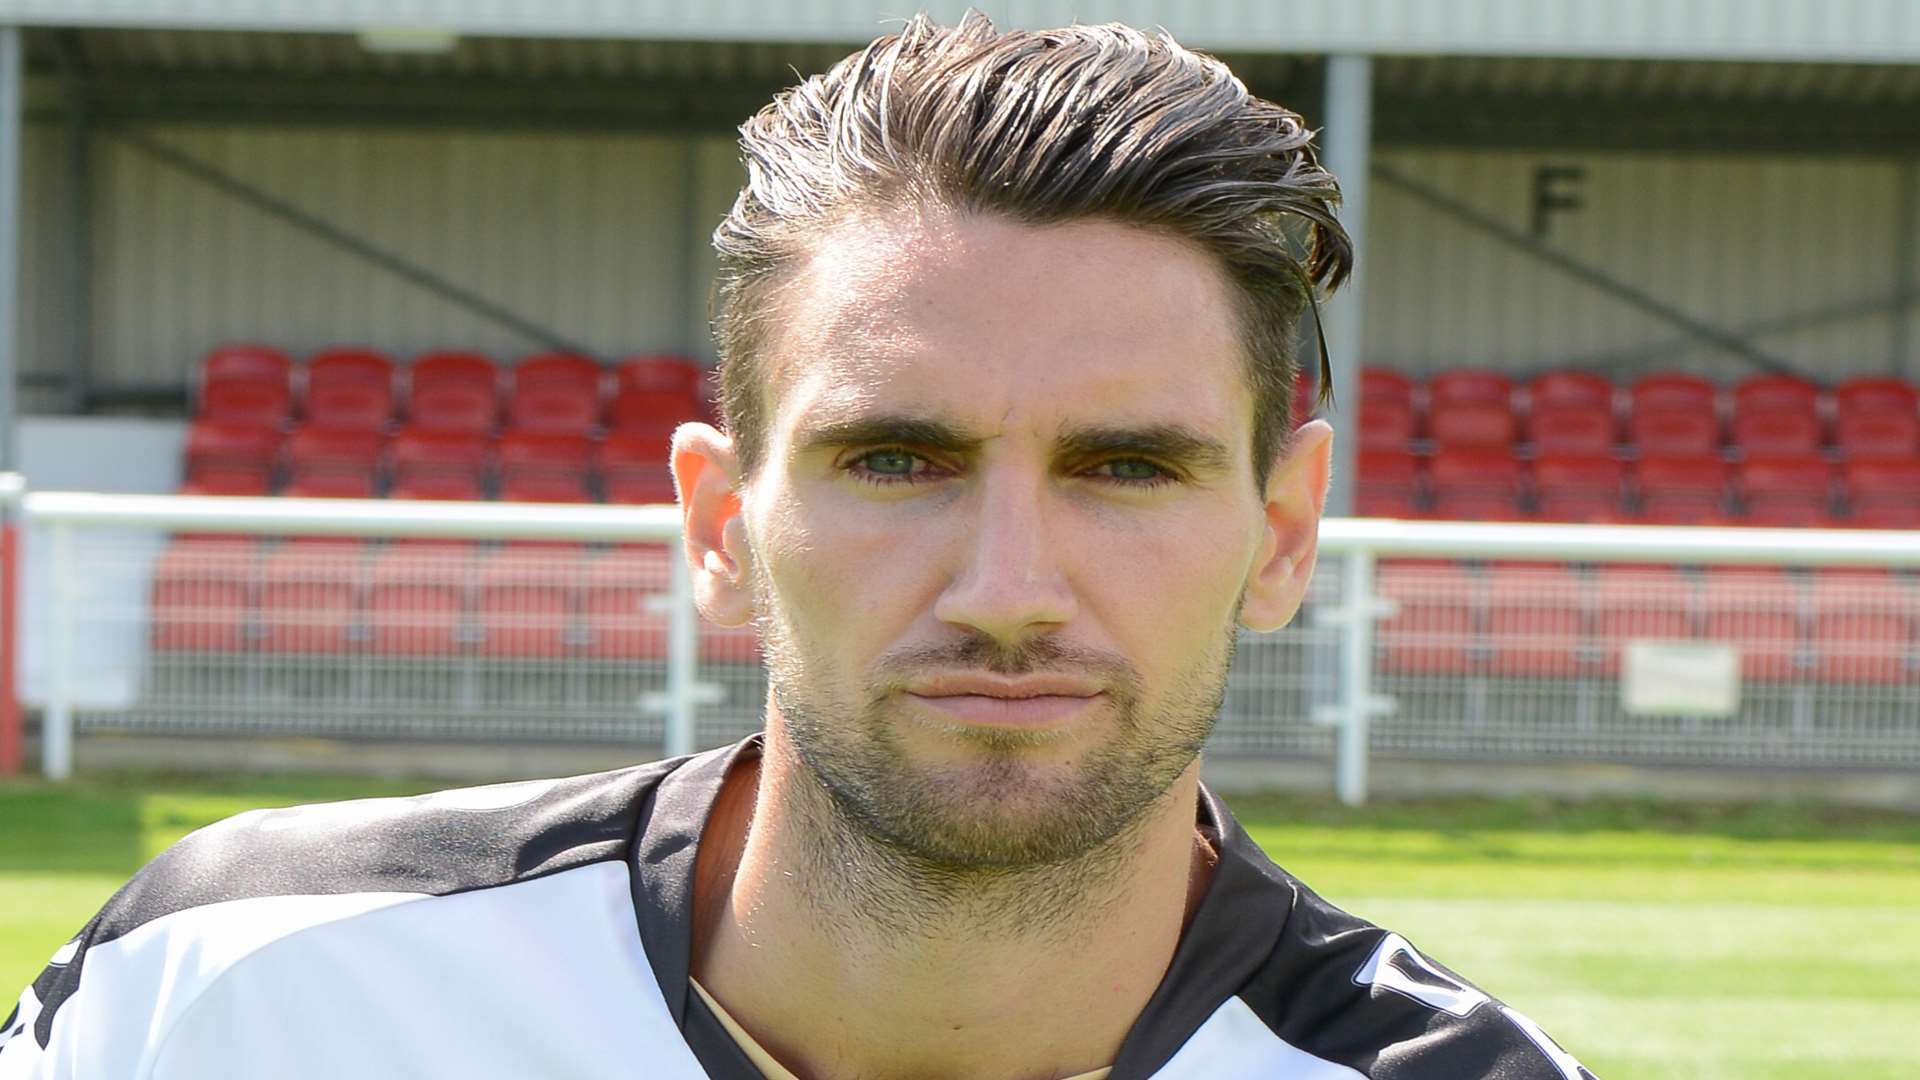 Dover defender Sean Francis is working on how he can improve his celebrations after scoring a goal.